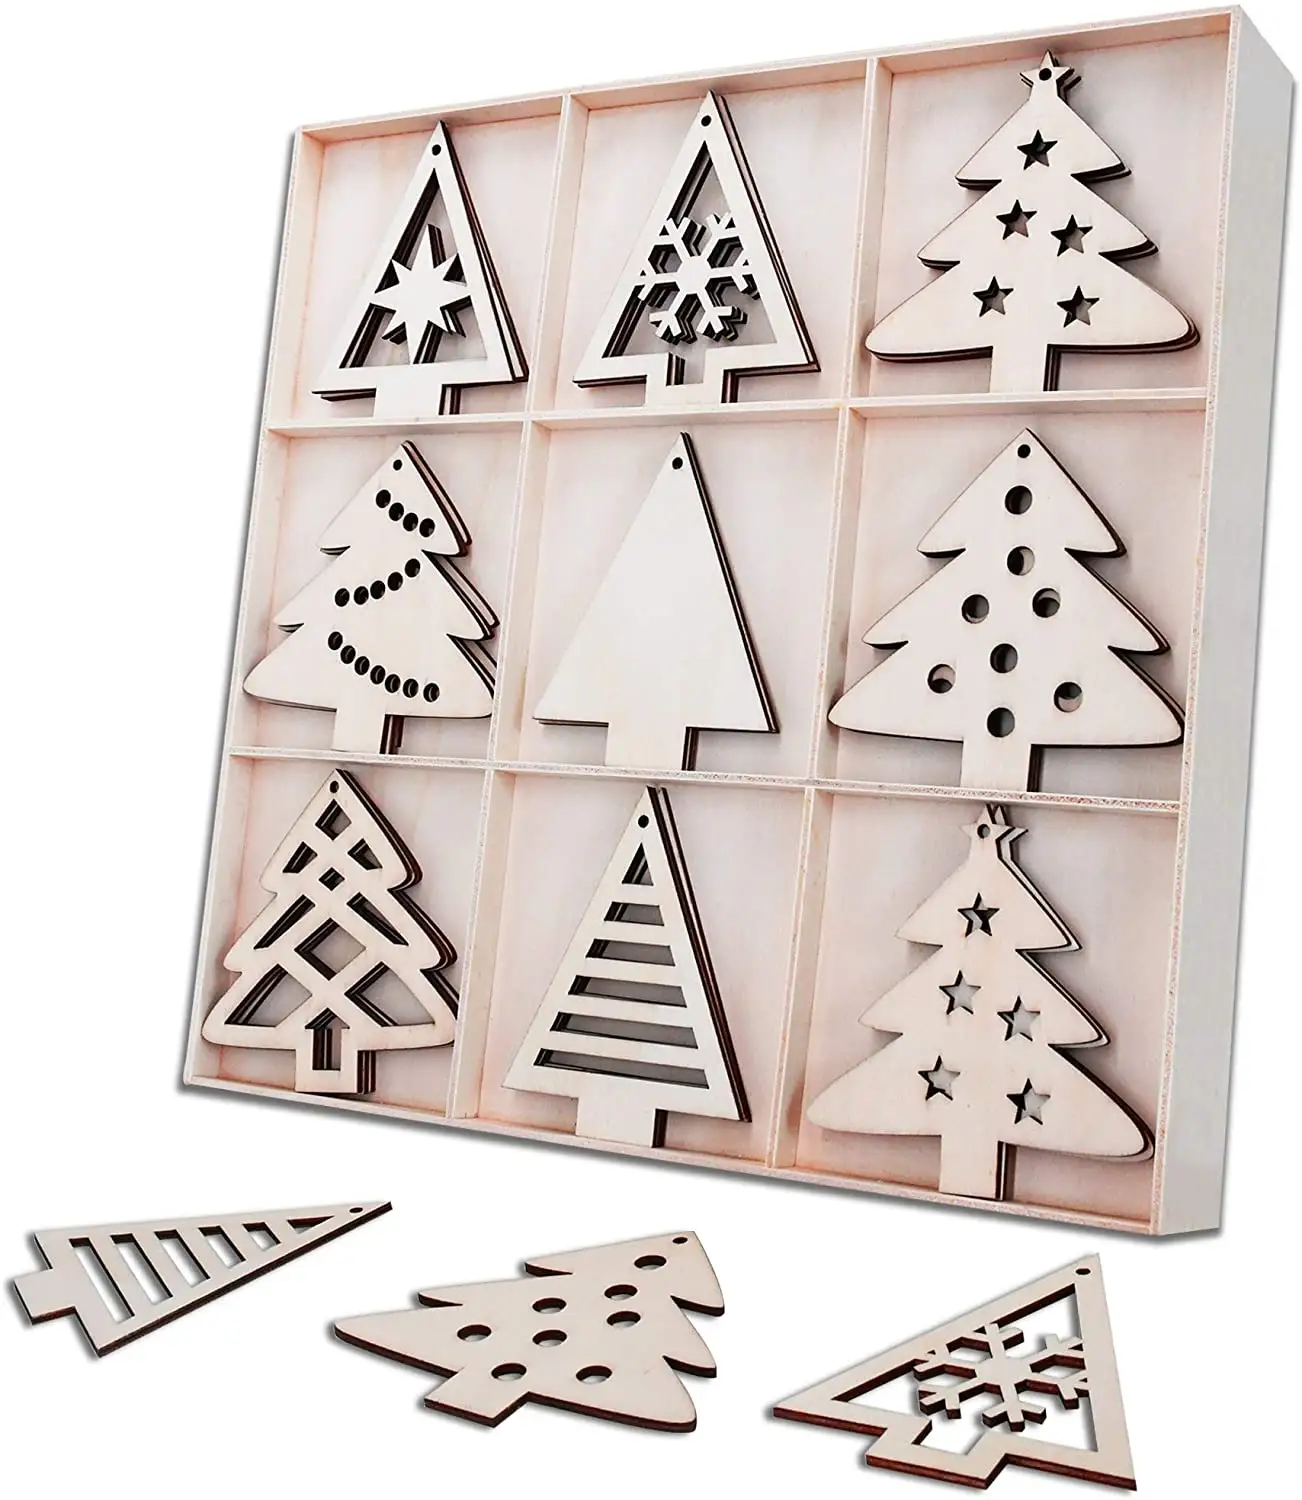 TaiLai Wooden Christmas Trees Shaped Hanging Ornaments Unfinished Blank Wood Cutouts Embellishments Crafts Natural Twine Kits